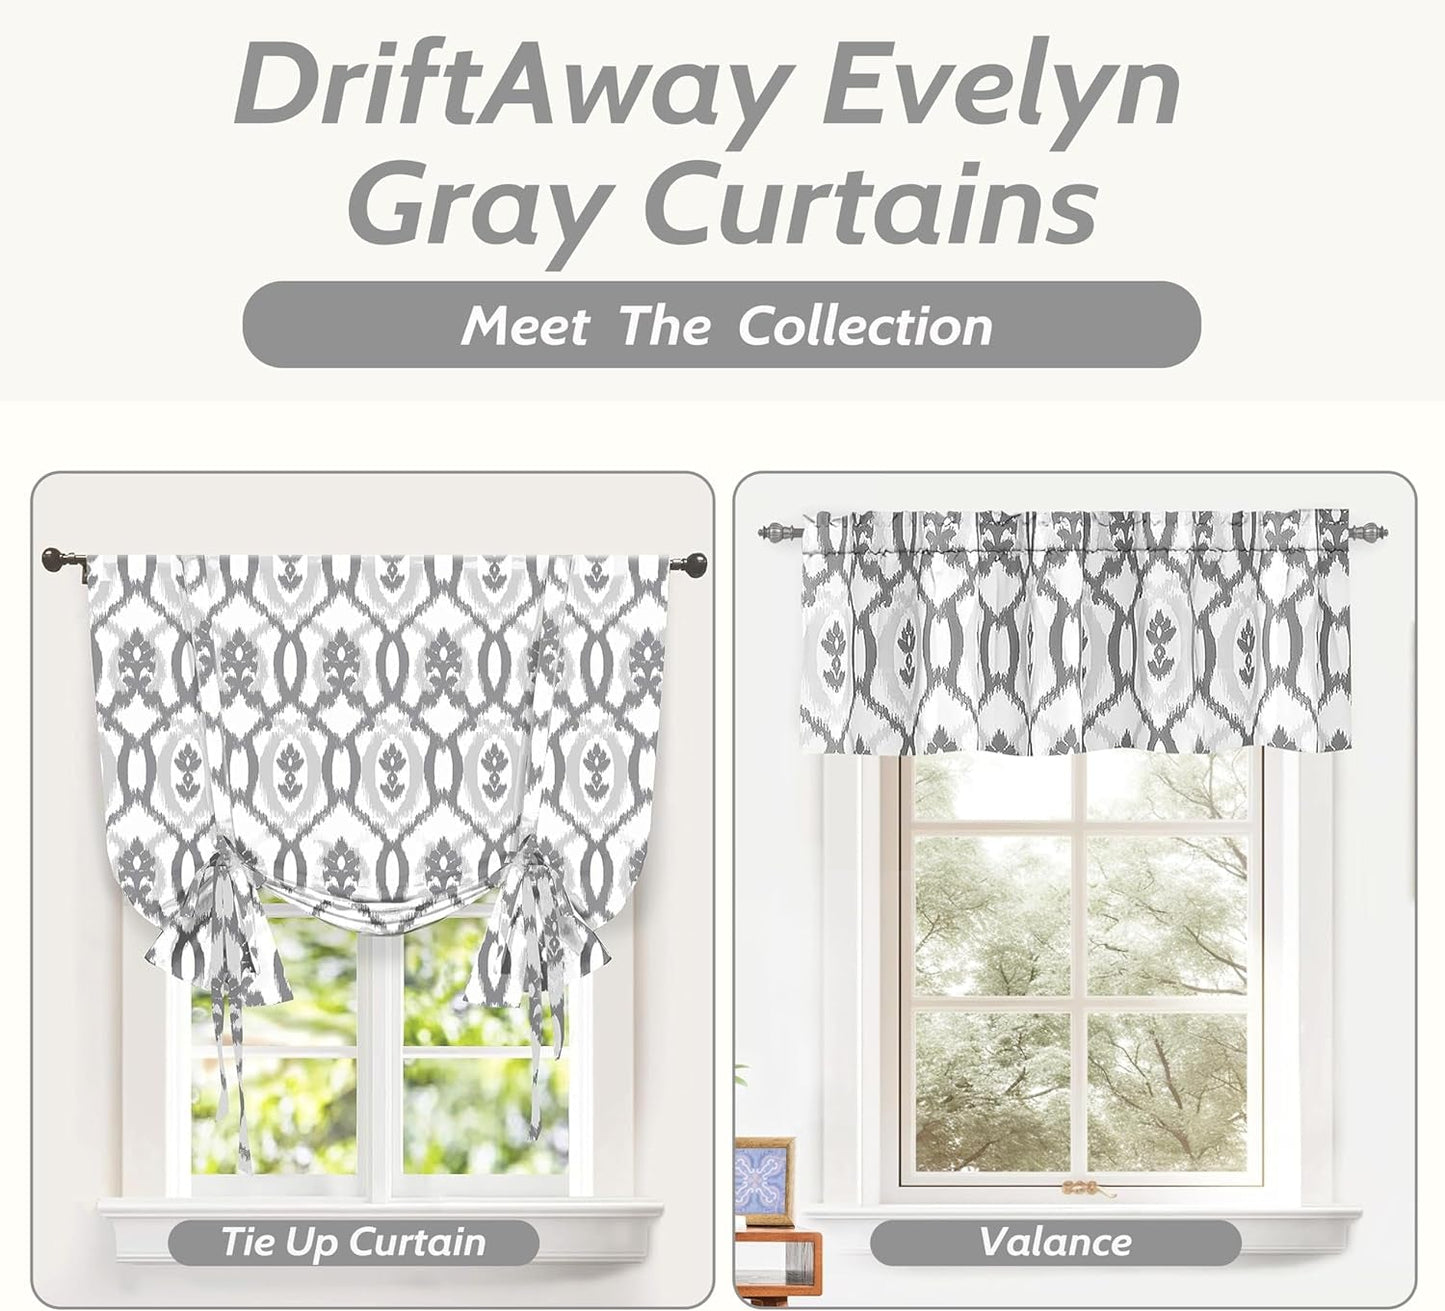 Driftaway Evelyn Ikat Fleur Floral Pattern Window Curtain Valance 52 Inch by 18 Inch Gray